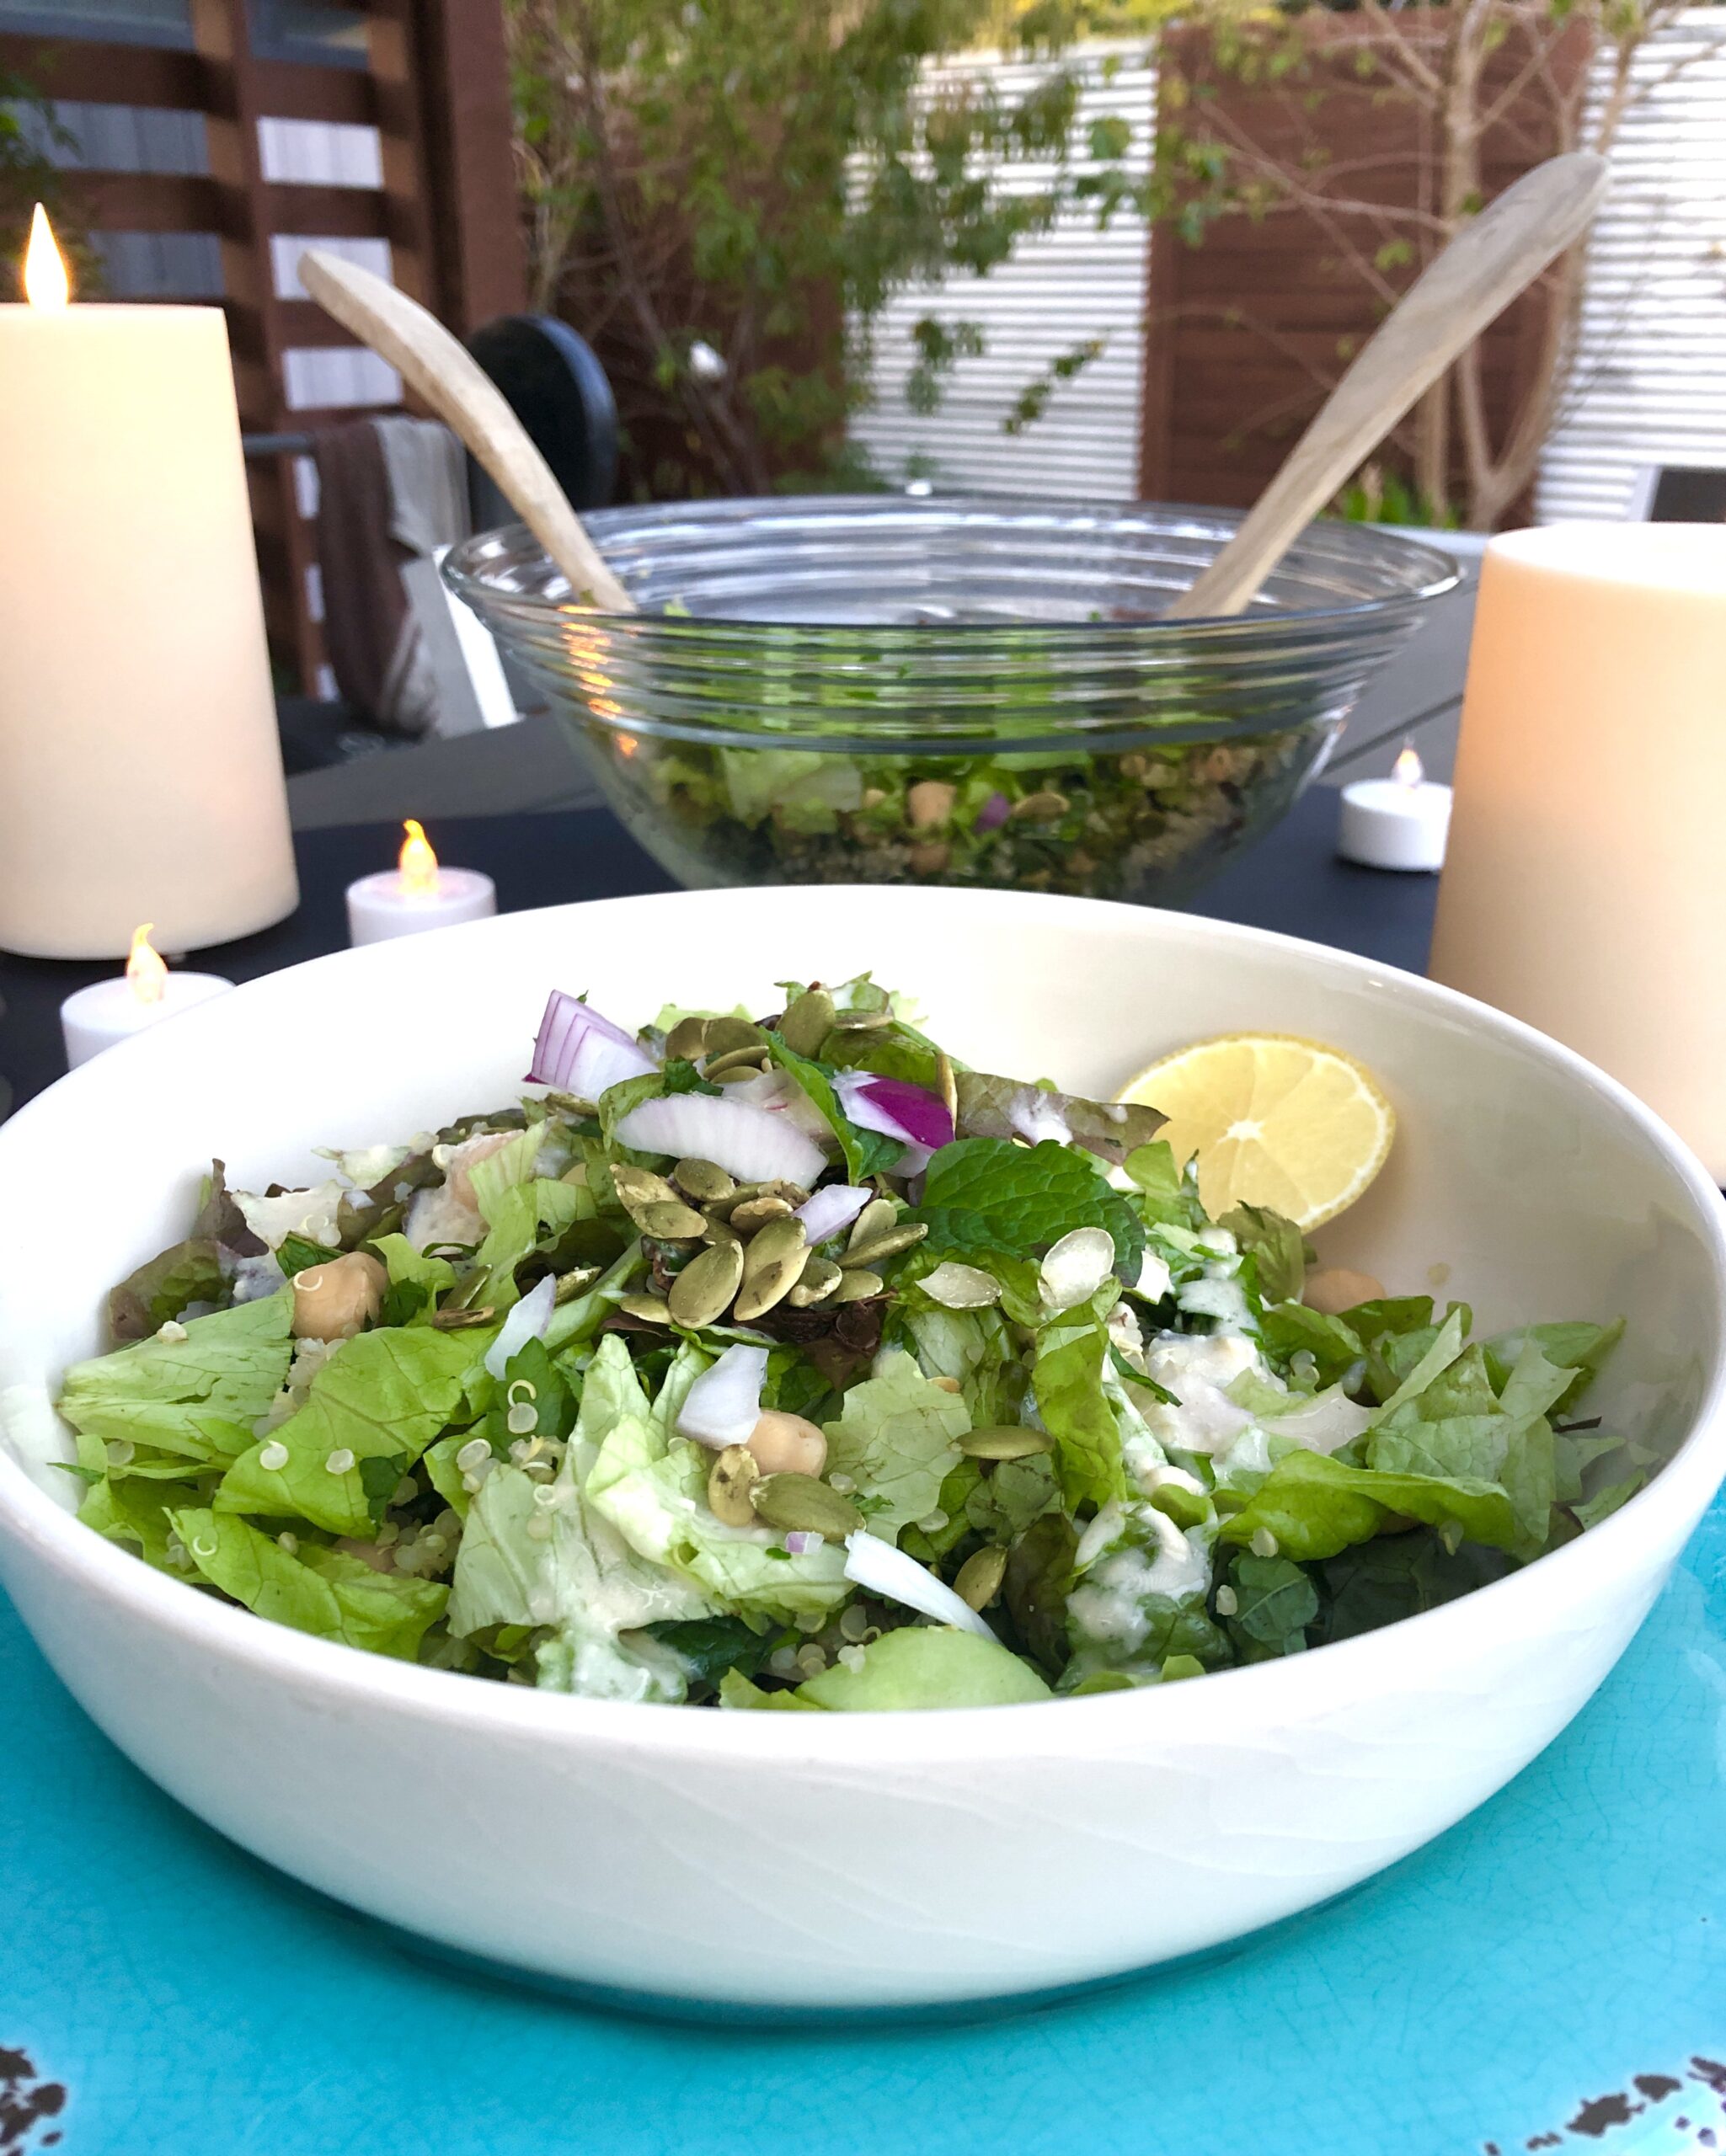 In the foreground is a white salad bowl on top of a blue plate. The salad bowl contains a salad of greens, quinoa, red onions, mint, parsley, sun-dried tomatoes, cucumbers, and pumpkin seeds with a lemon wedge in the bowl. In the background is a large serving bowl filled with salad. There are lit candles on the table